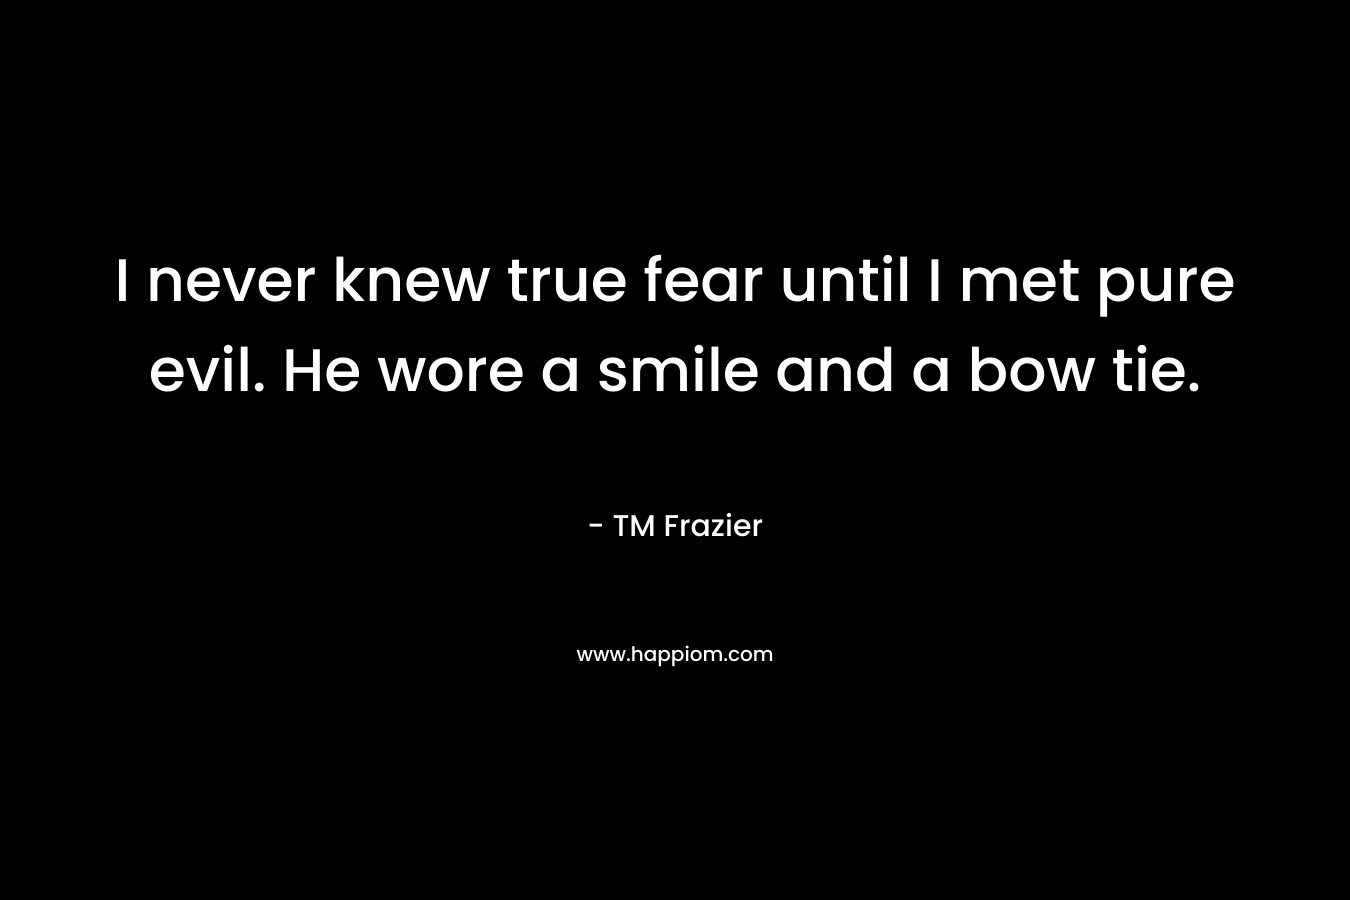 I never knew true fear until I met pure evil. He wore a smile and a bow tie.